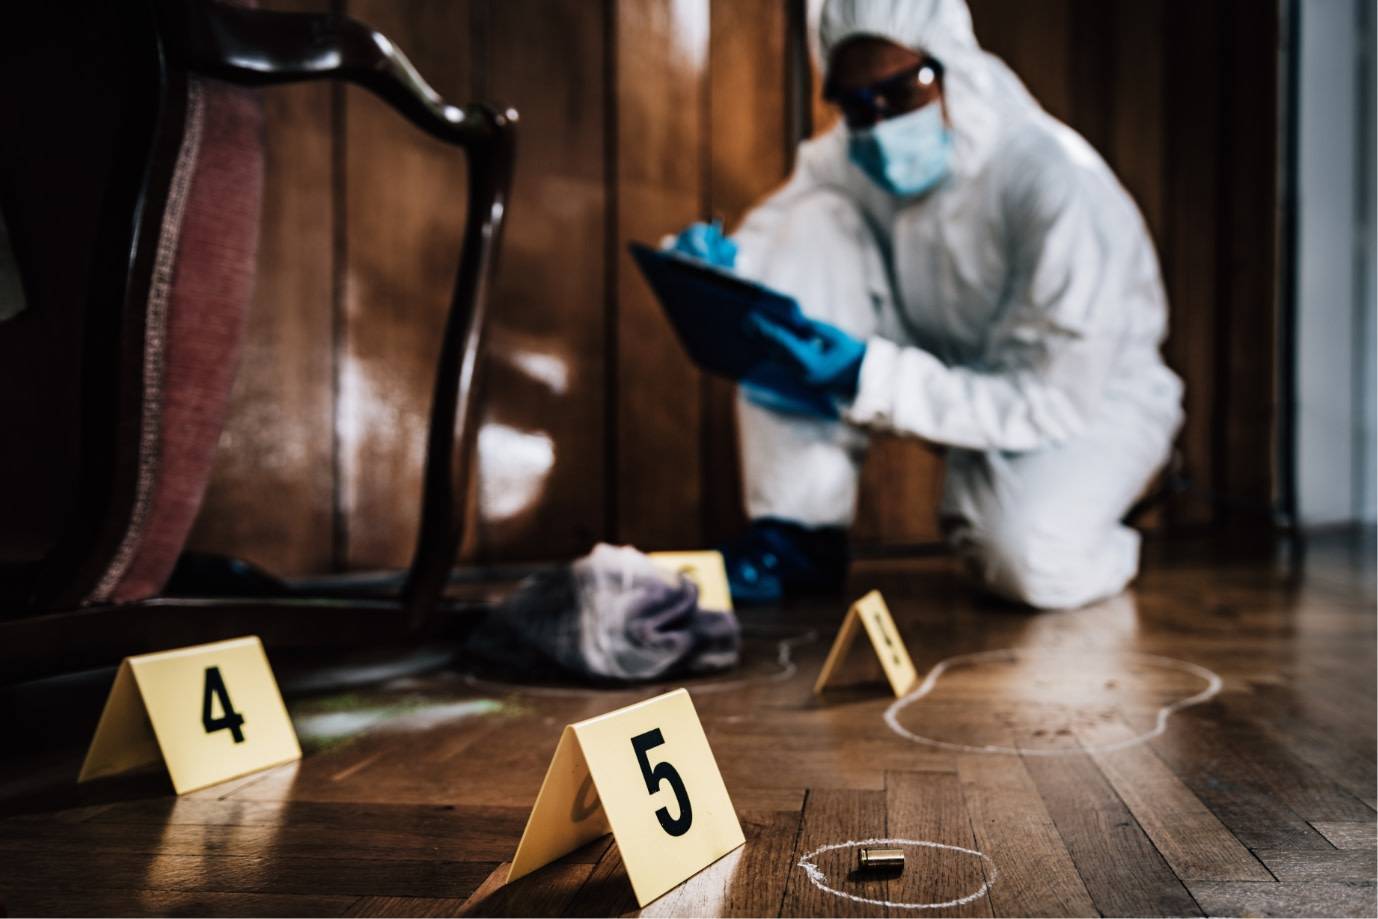 A photo of a crime scene with chalk outlines around bullet casings and a forensic detective in the background